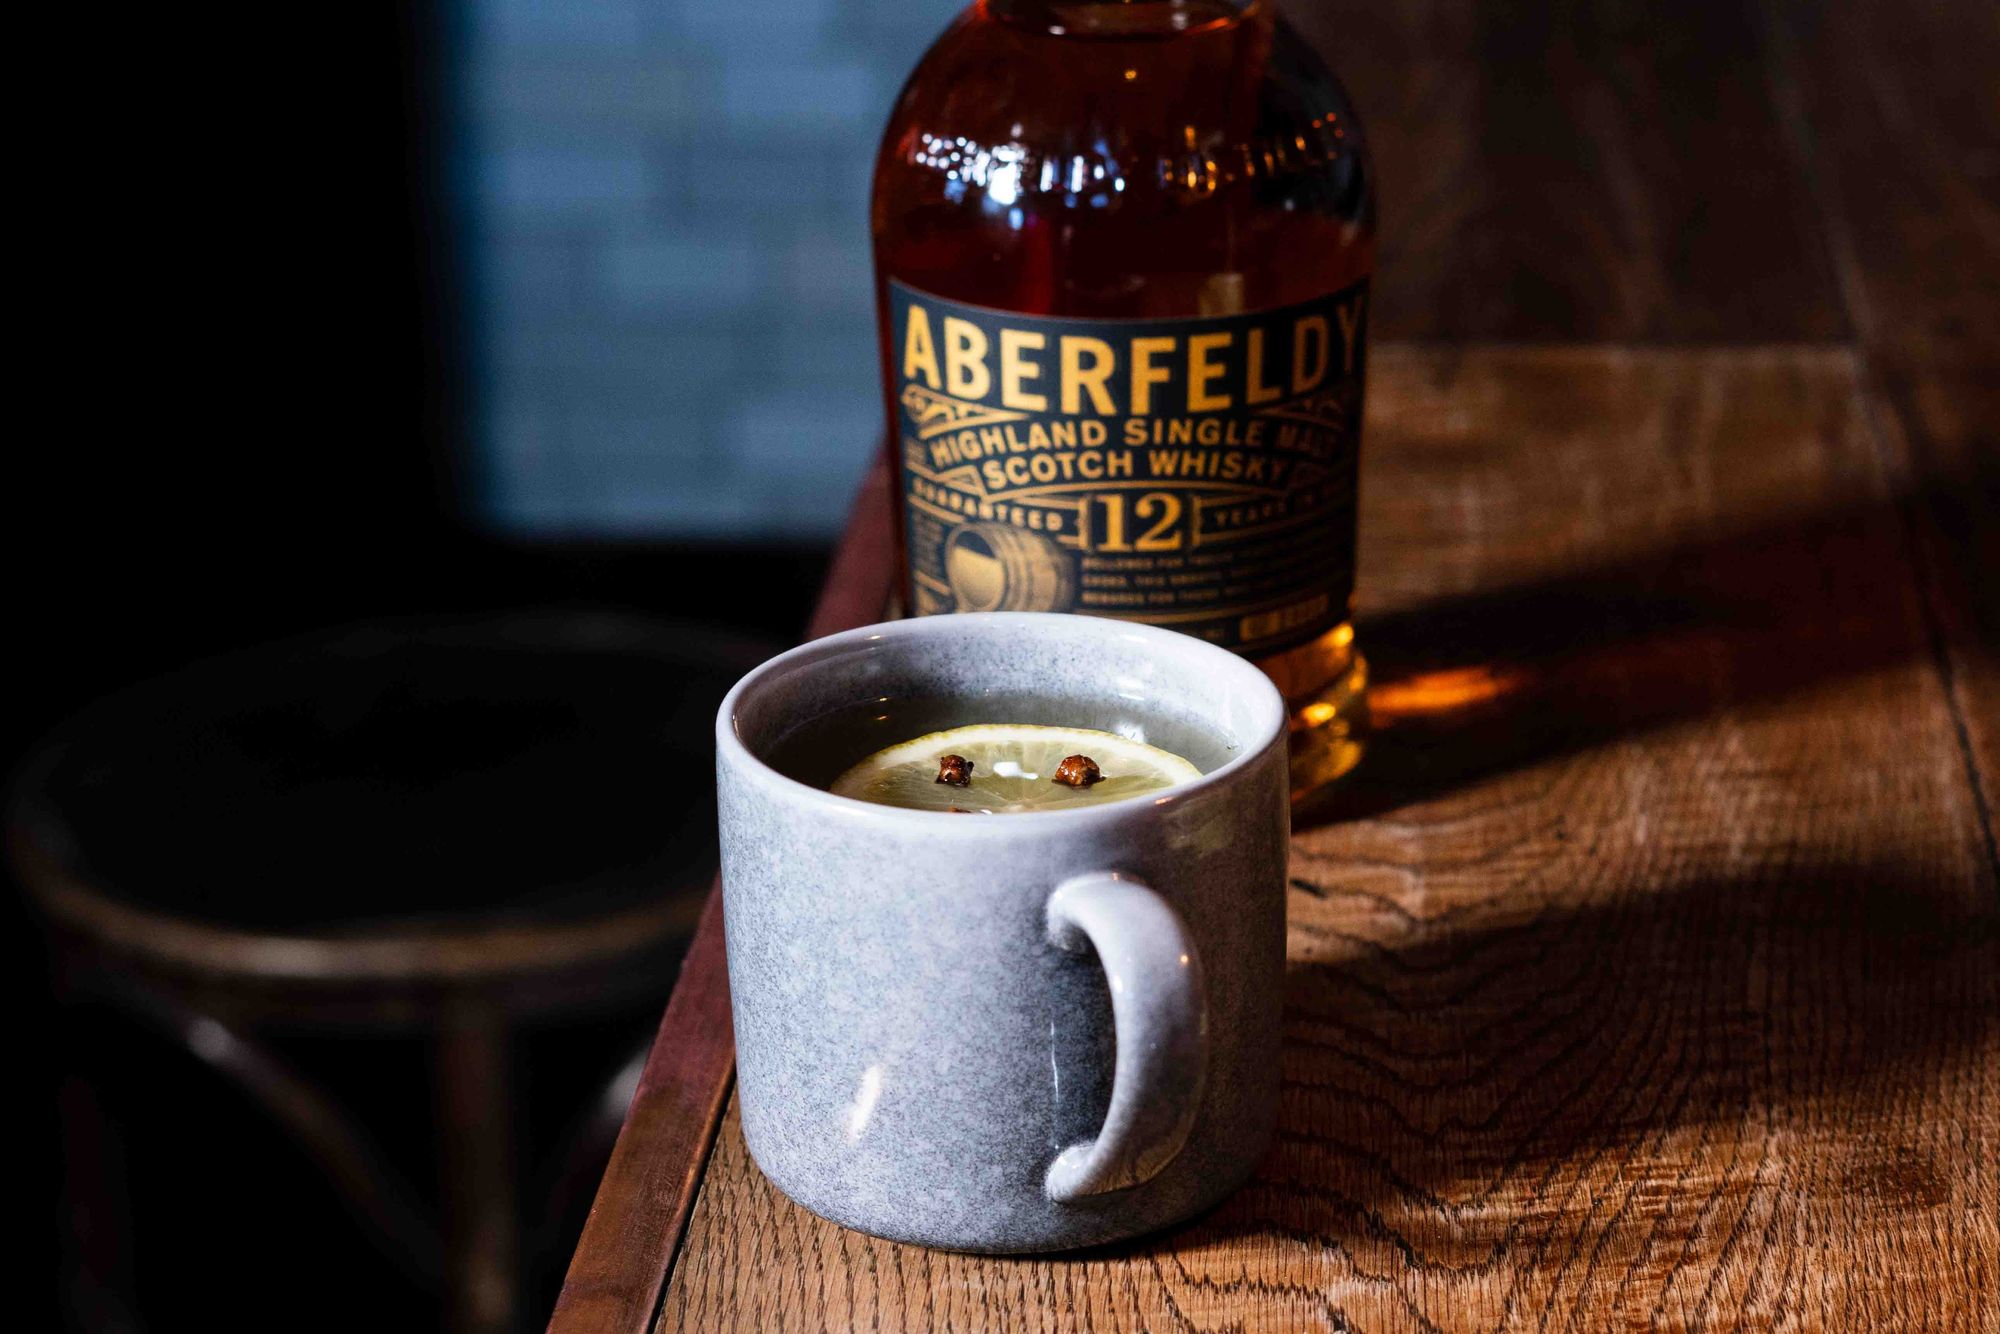 The Aberfeldy Hot Toddy at The Bank in Newtwon. Photo: Boothby